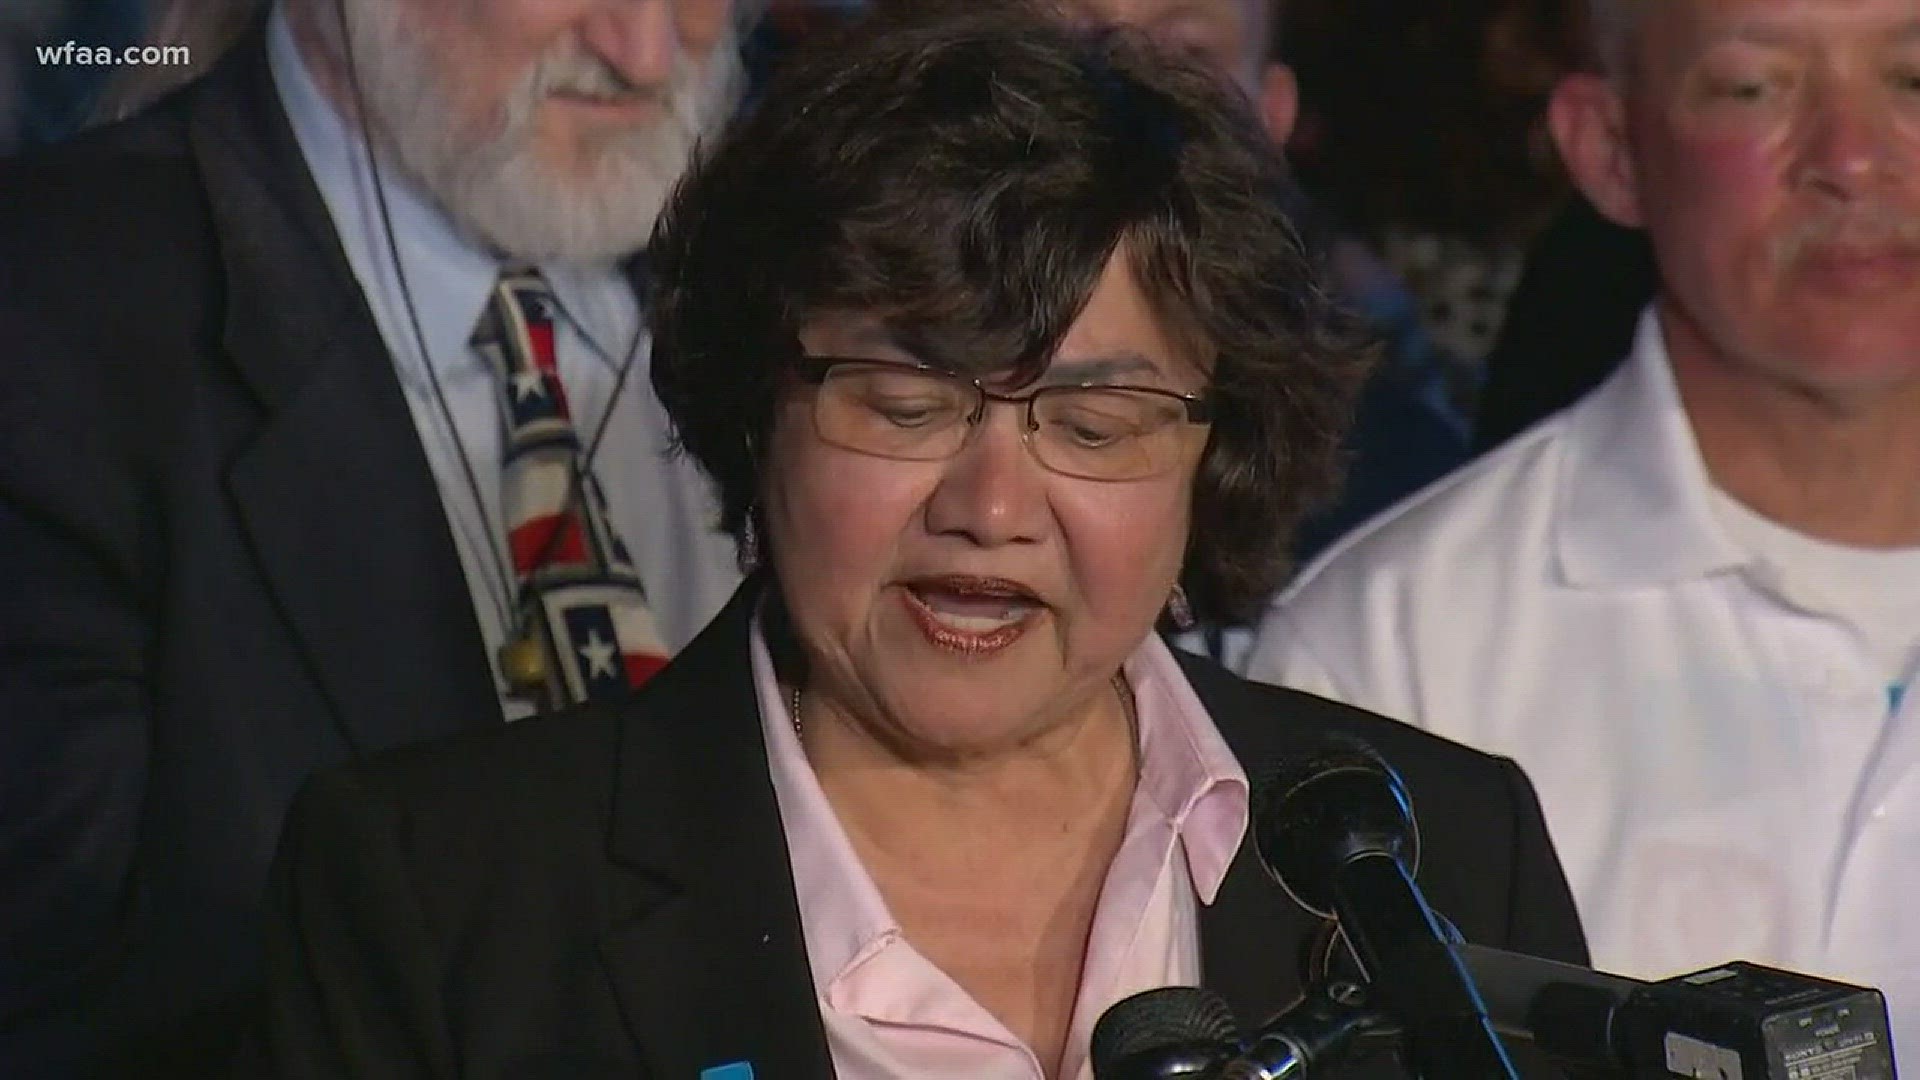 Lupe Valdez: Democratic race for governor